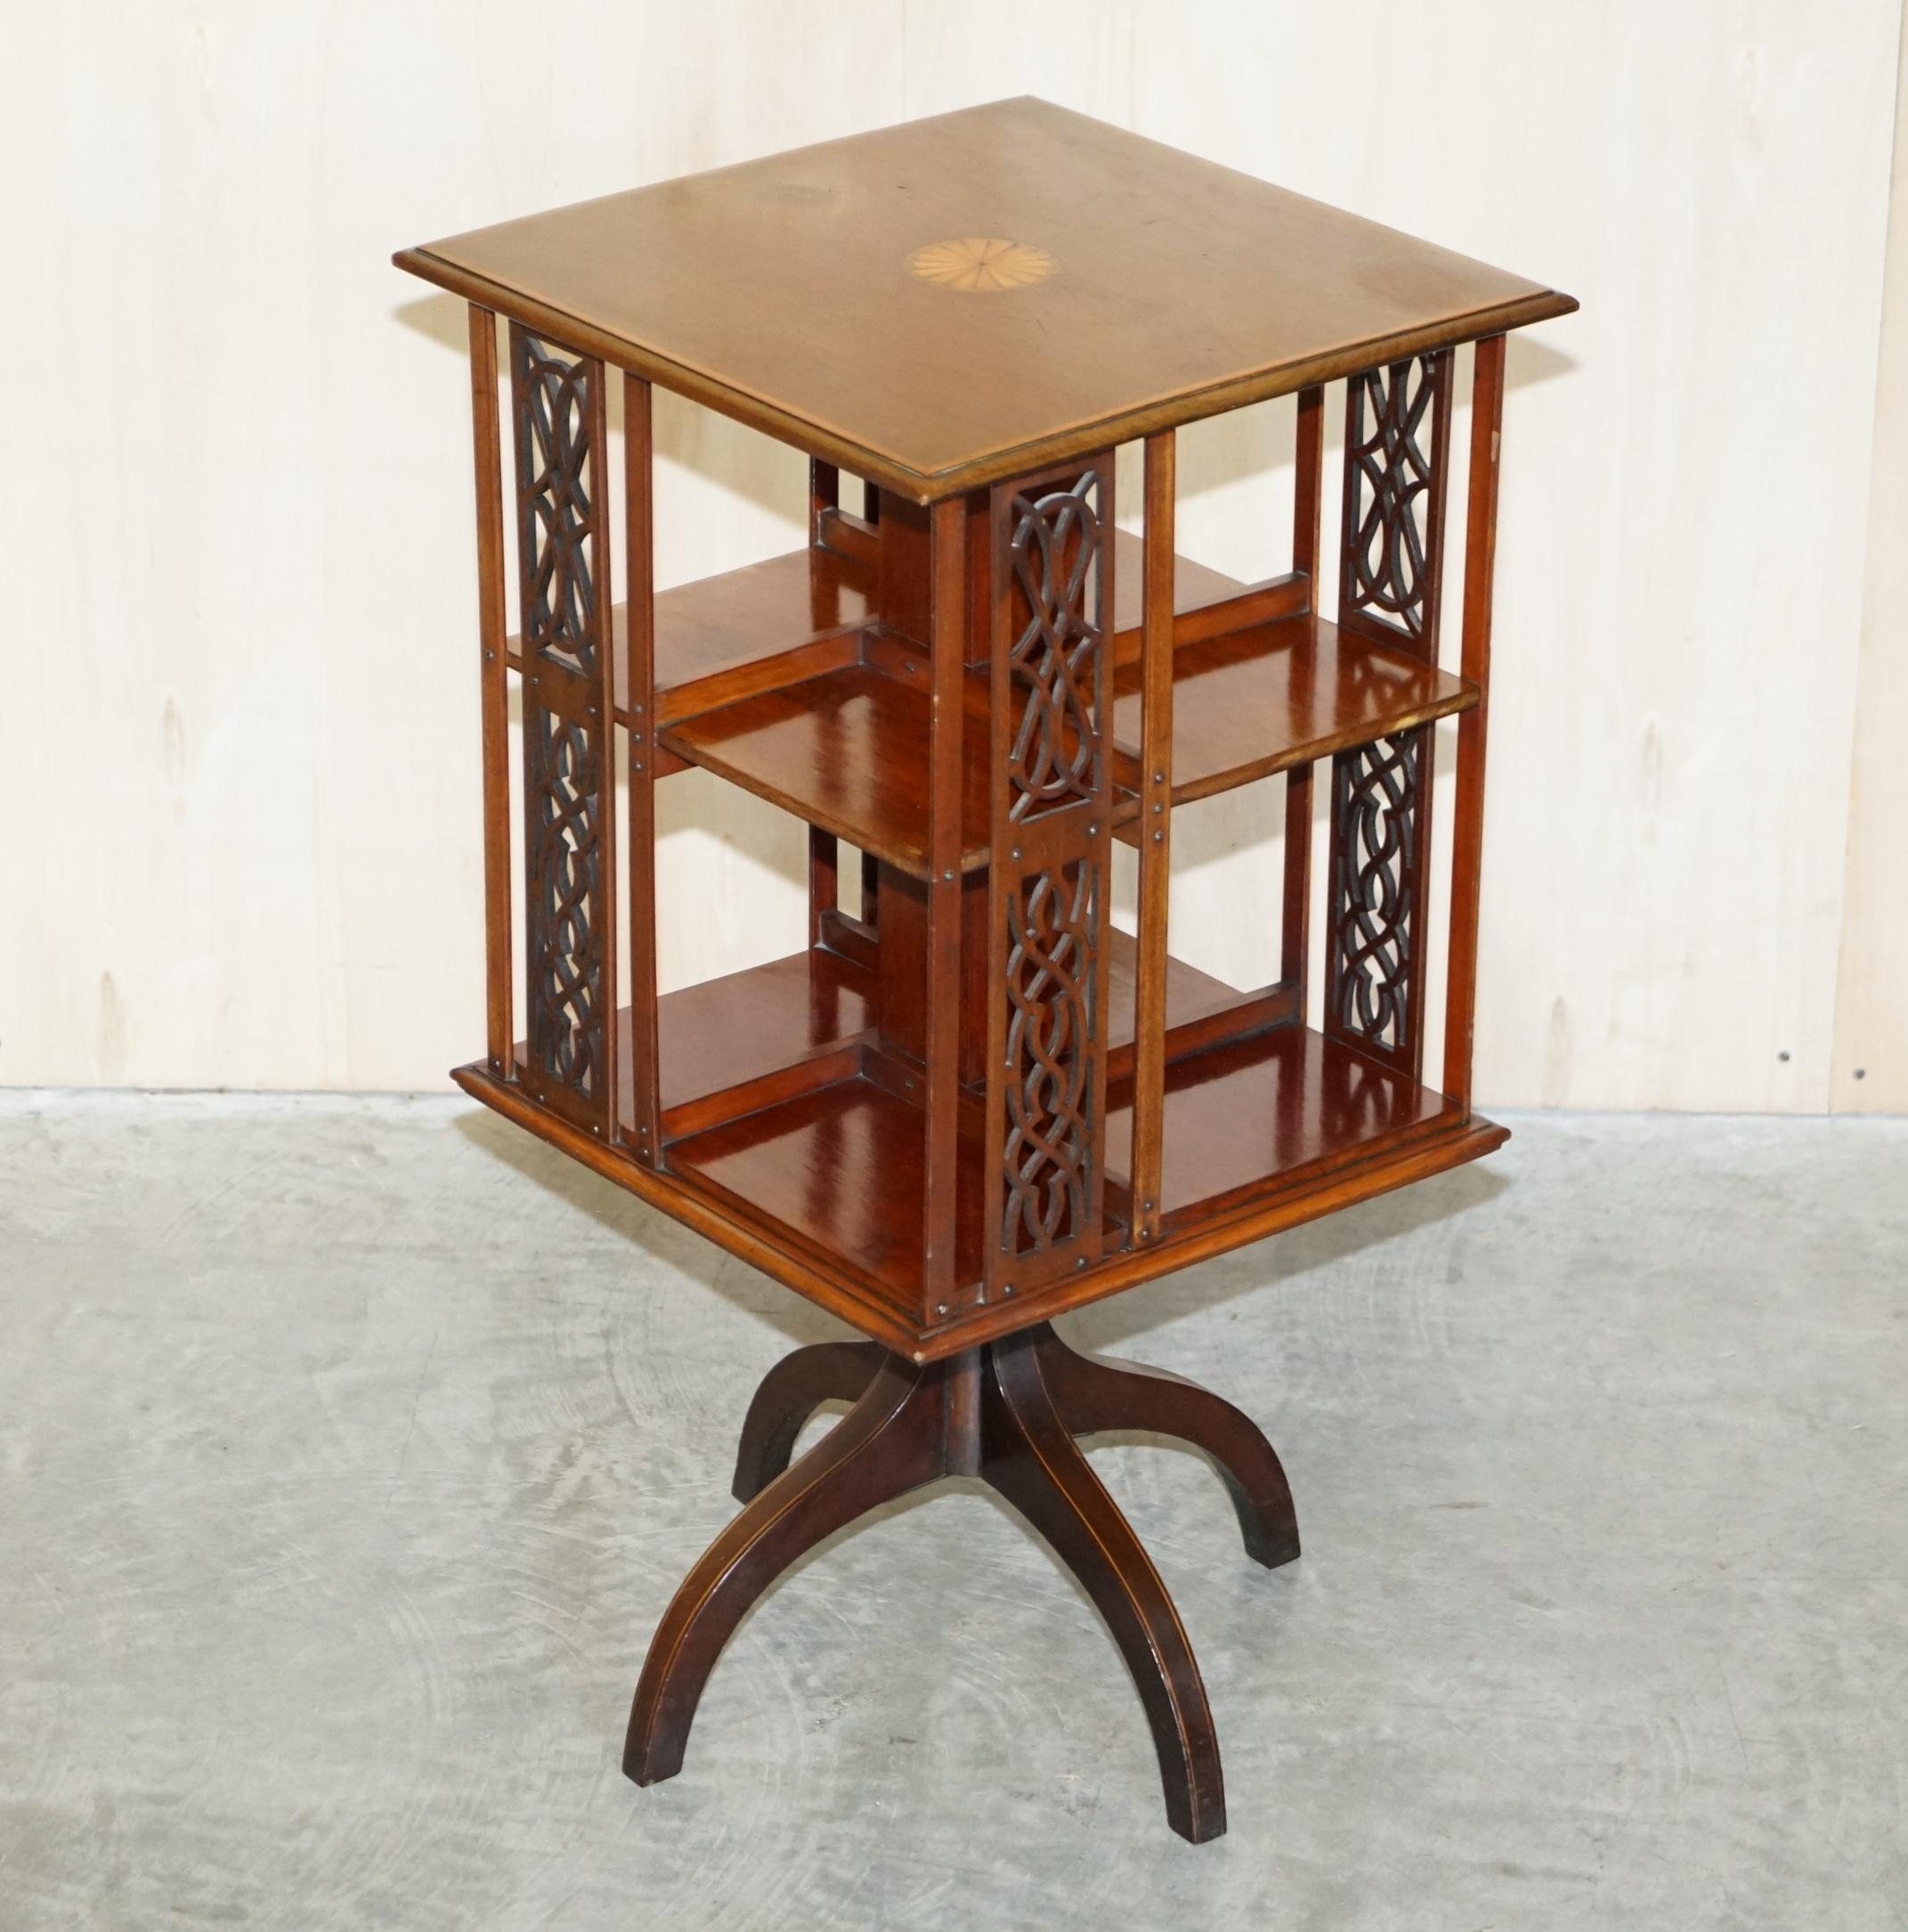 We are delighted to offer for sale this very fine antique Sheraton Revival Mahogany & Satinwood, fret work carved, revolving bookcase table with ornately sculpted legs

A very good looking well made and decorative piece. Made in the Sheraton